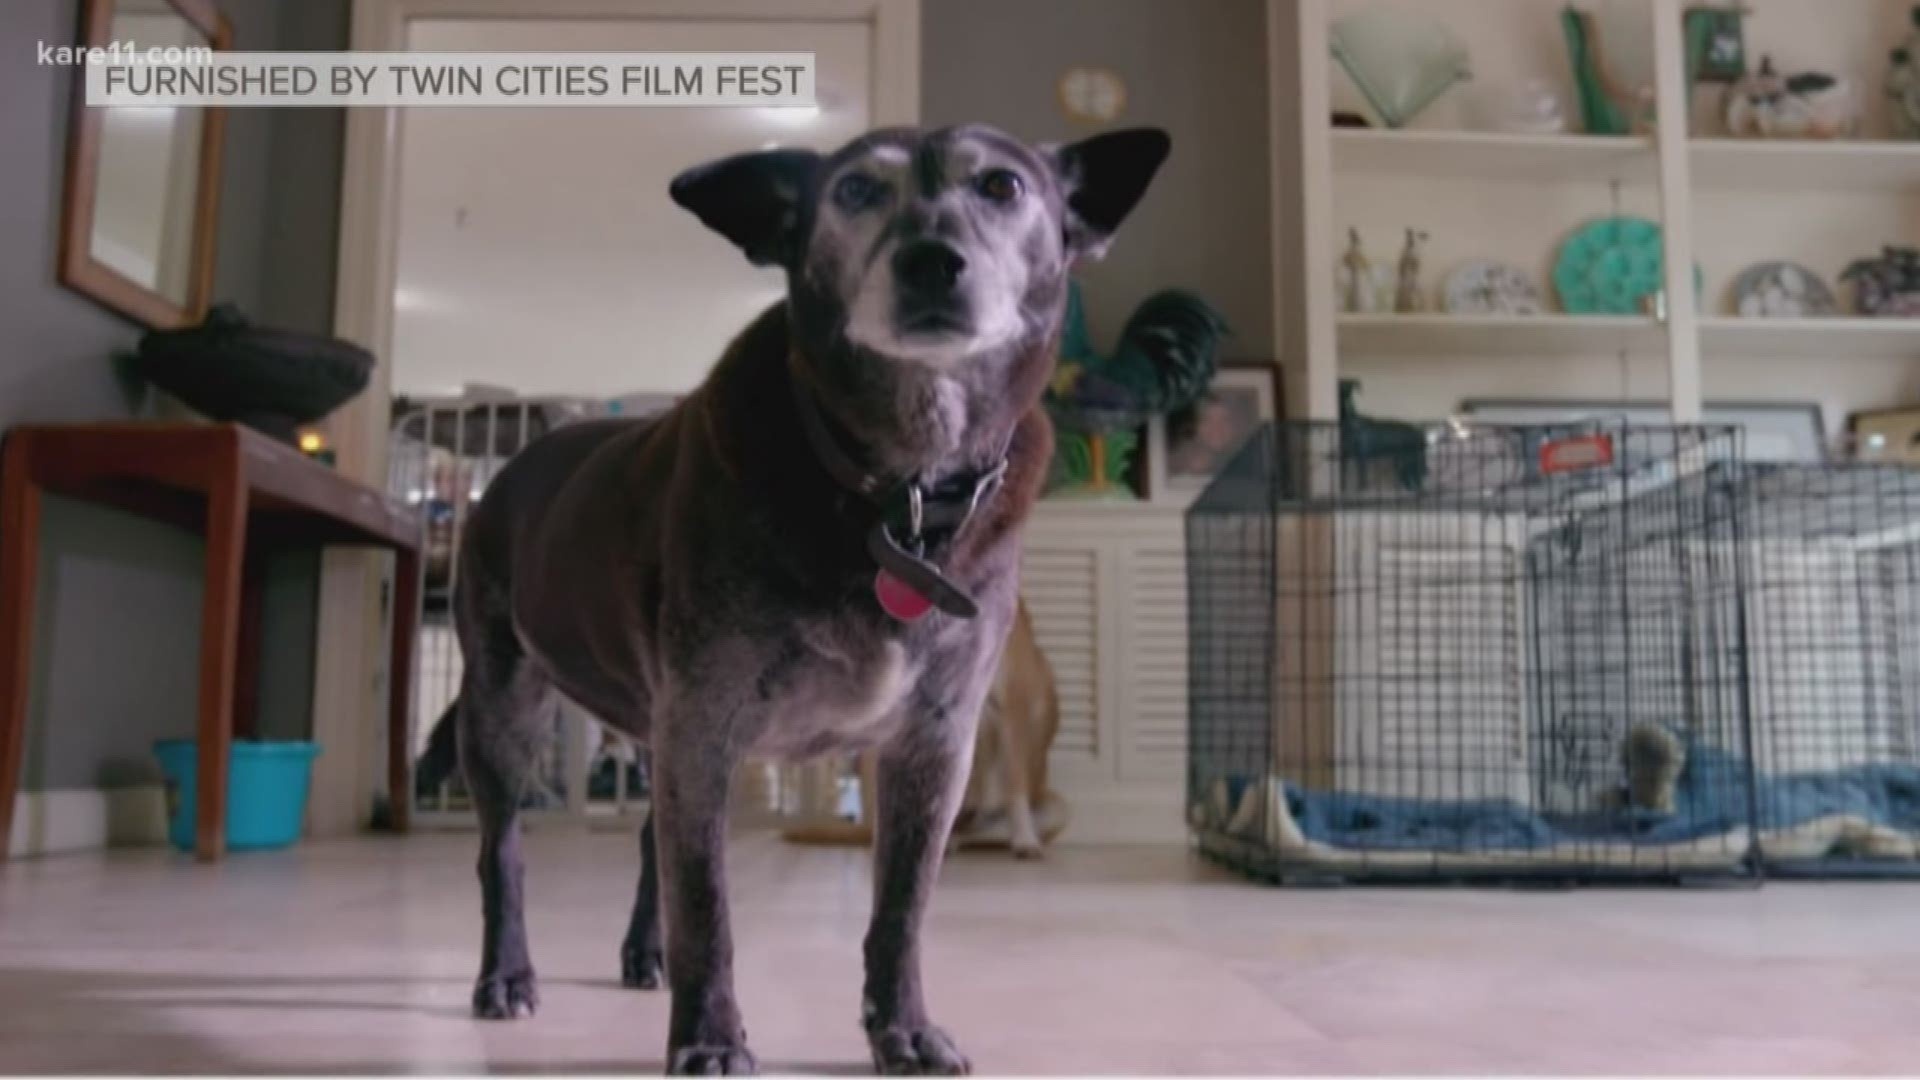 Every year, the Twin Cities Film Fest includes a Changemaker Series highlighting a just cause. This year, the focus is on animal humanity. The festival starts Oct. 17.